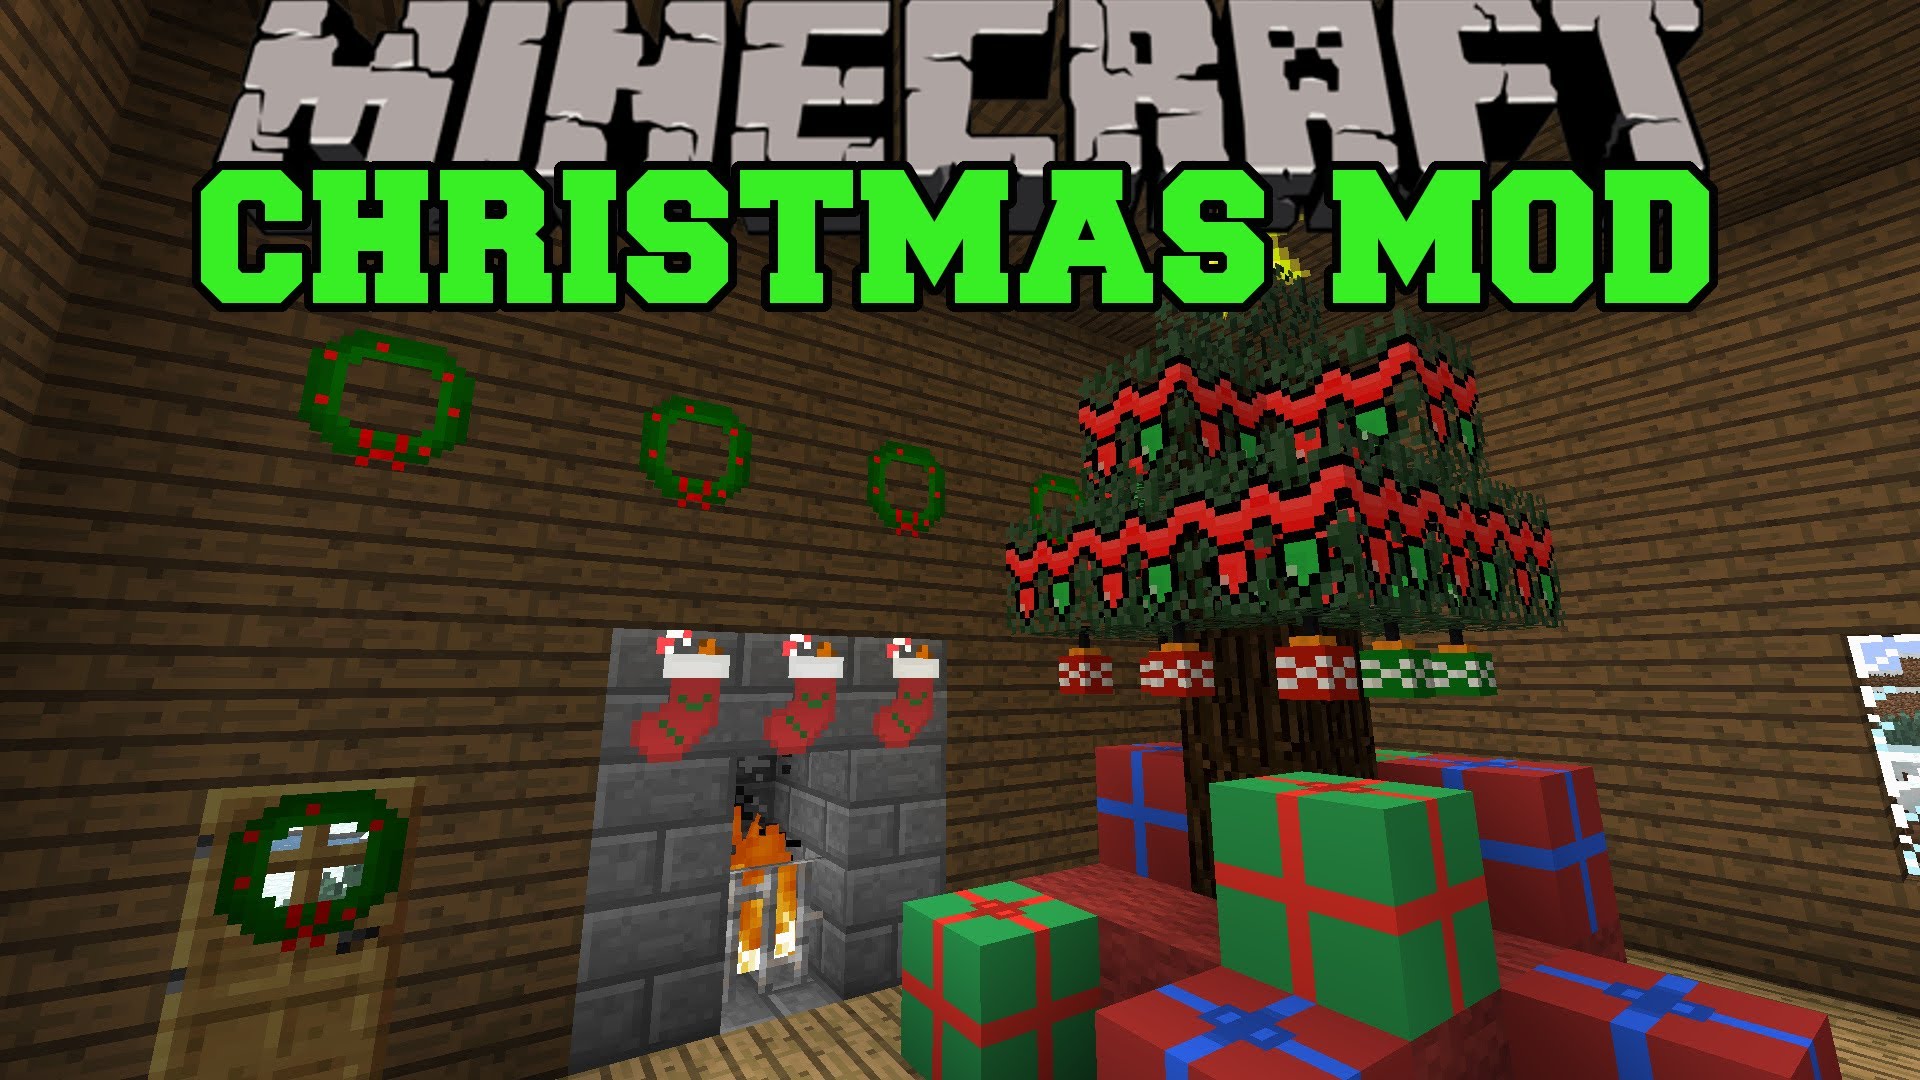 Minecraft Christmas Mod Santa Gives You Presents Decorations And